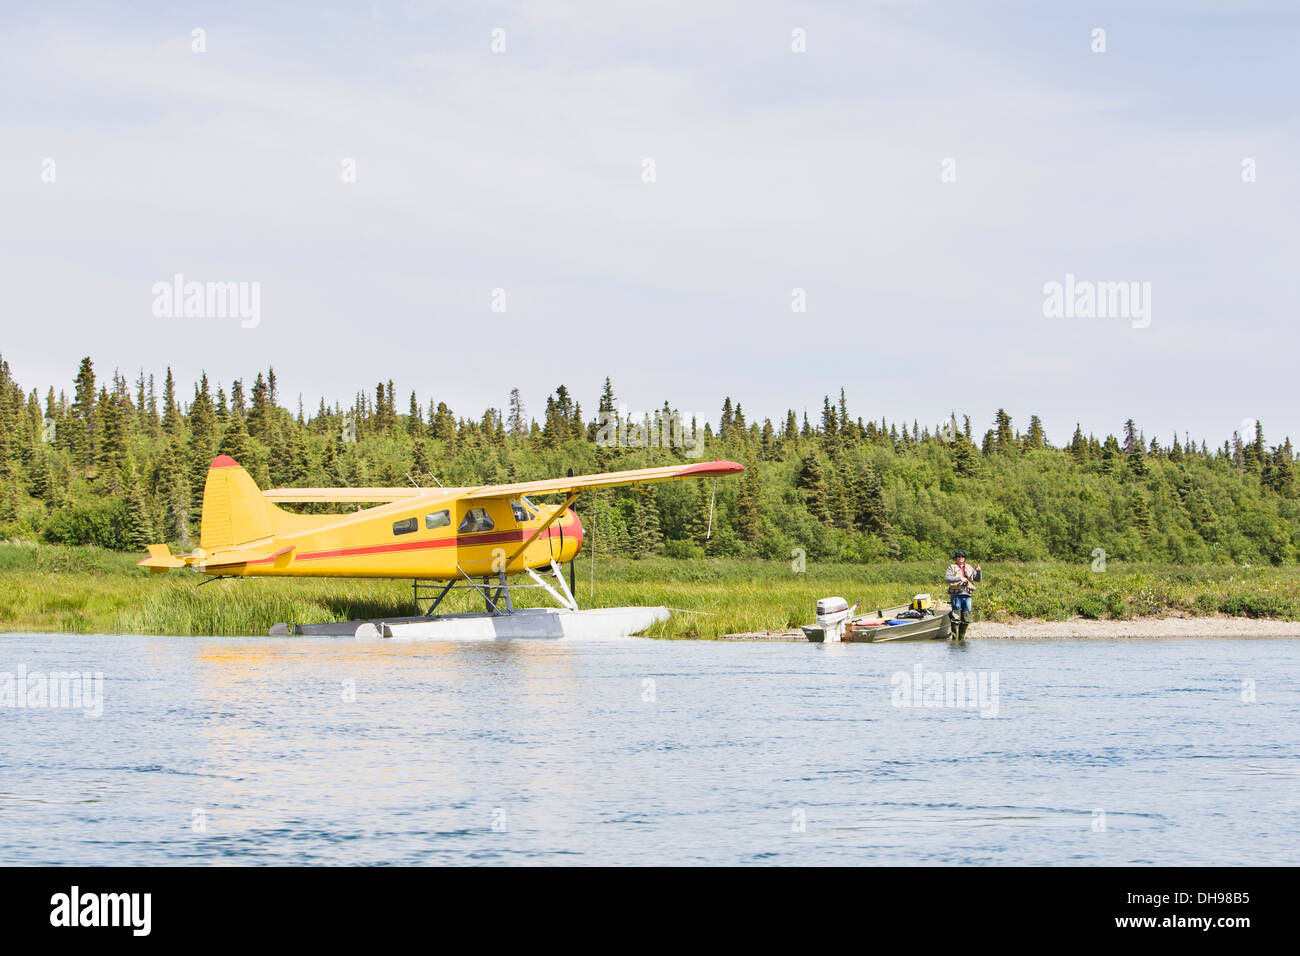 A Sport Fisherman Angling For Sockeye Salmon by A  De Havilland Beaver Floatplane And A Small Riverboat, The Kvichak River Stock Photo